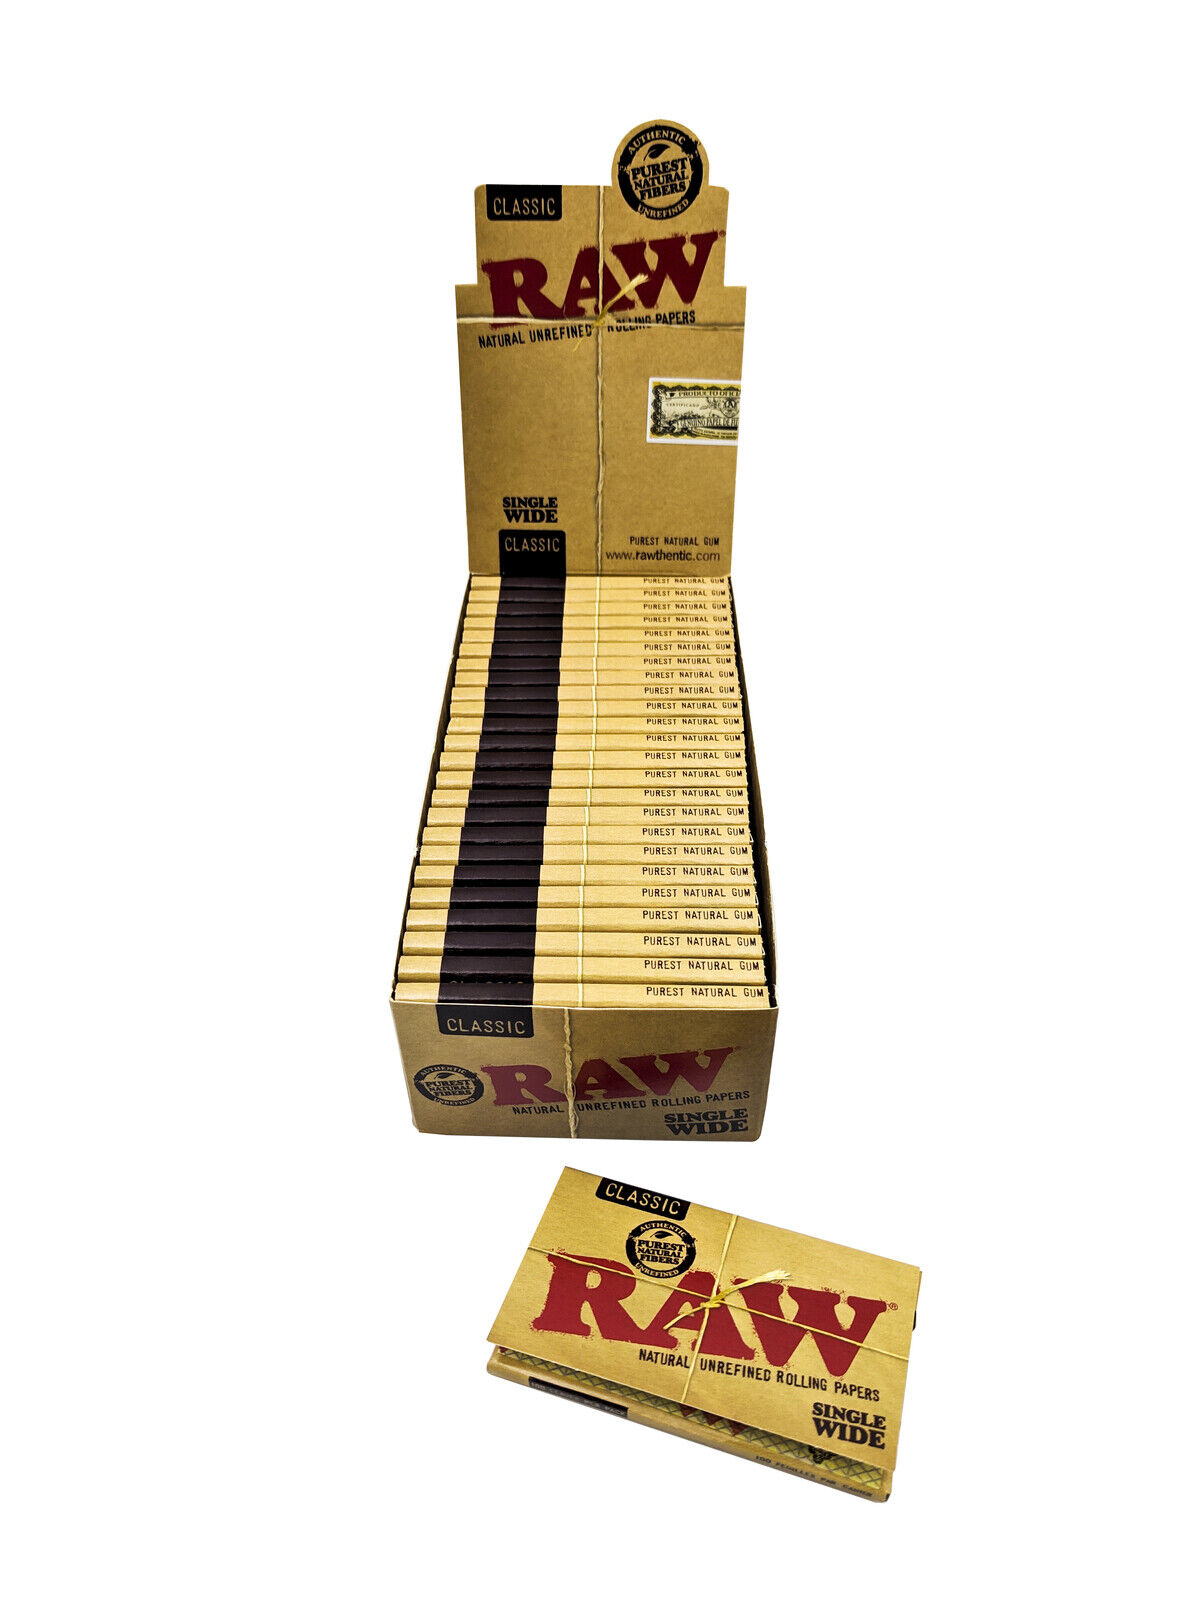 Raw natural single wide double Classic rolling paper 25 booklets per box